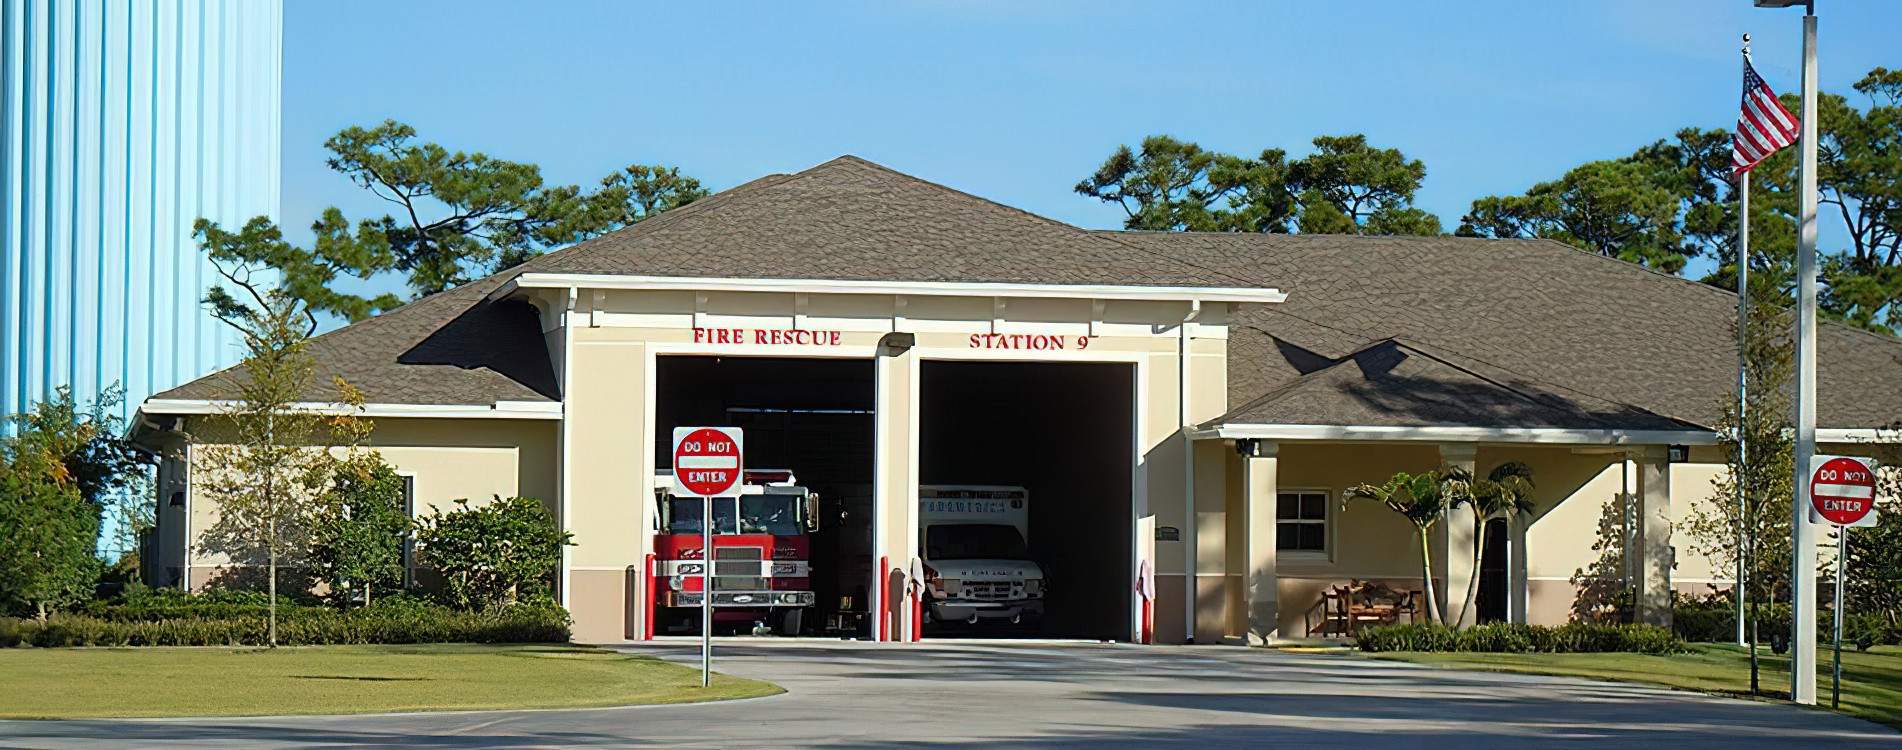 Indian River County Fire Station #9, Vero Beach, FL